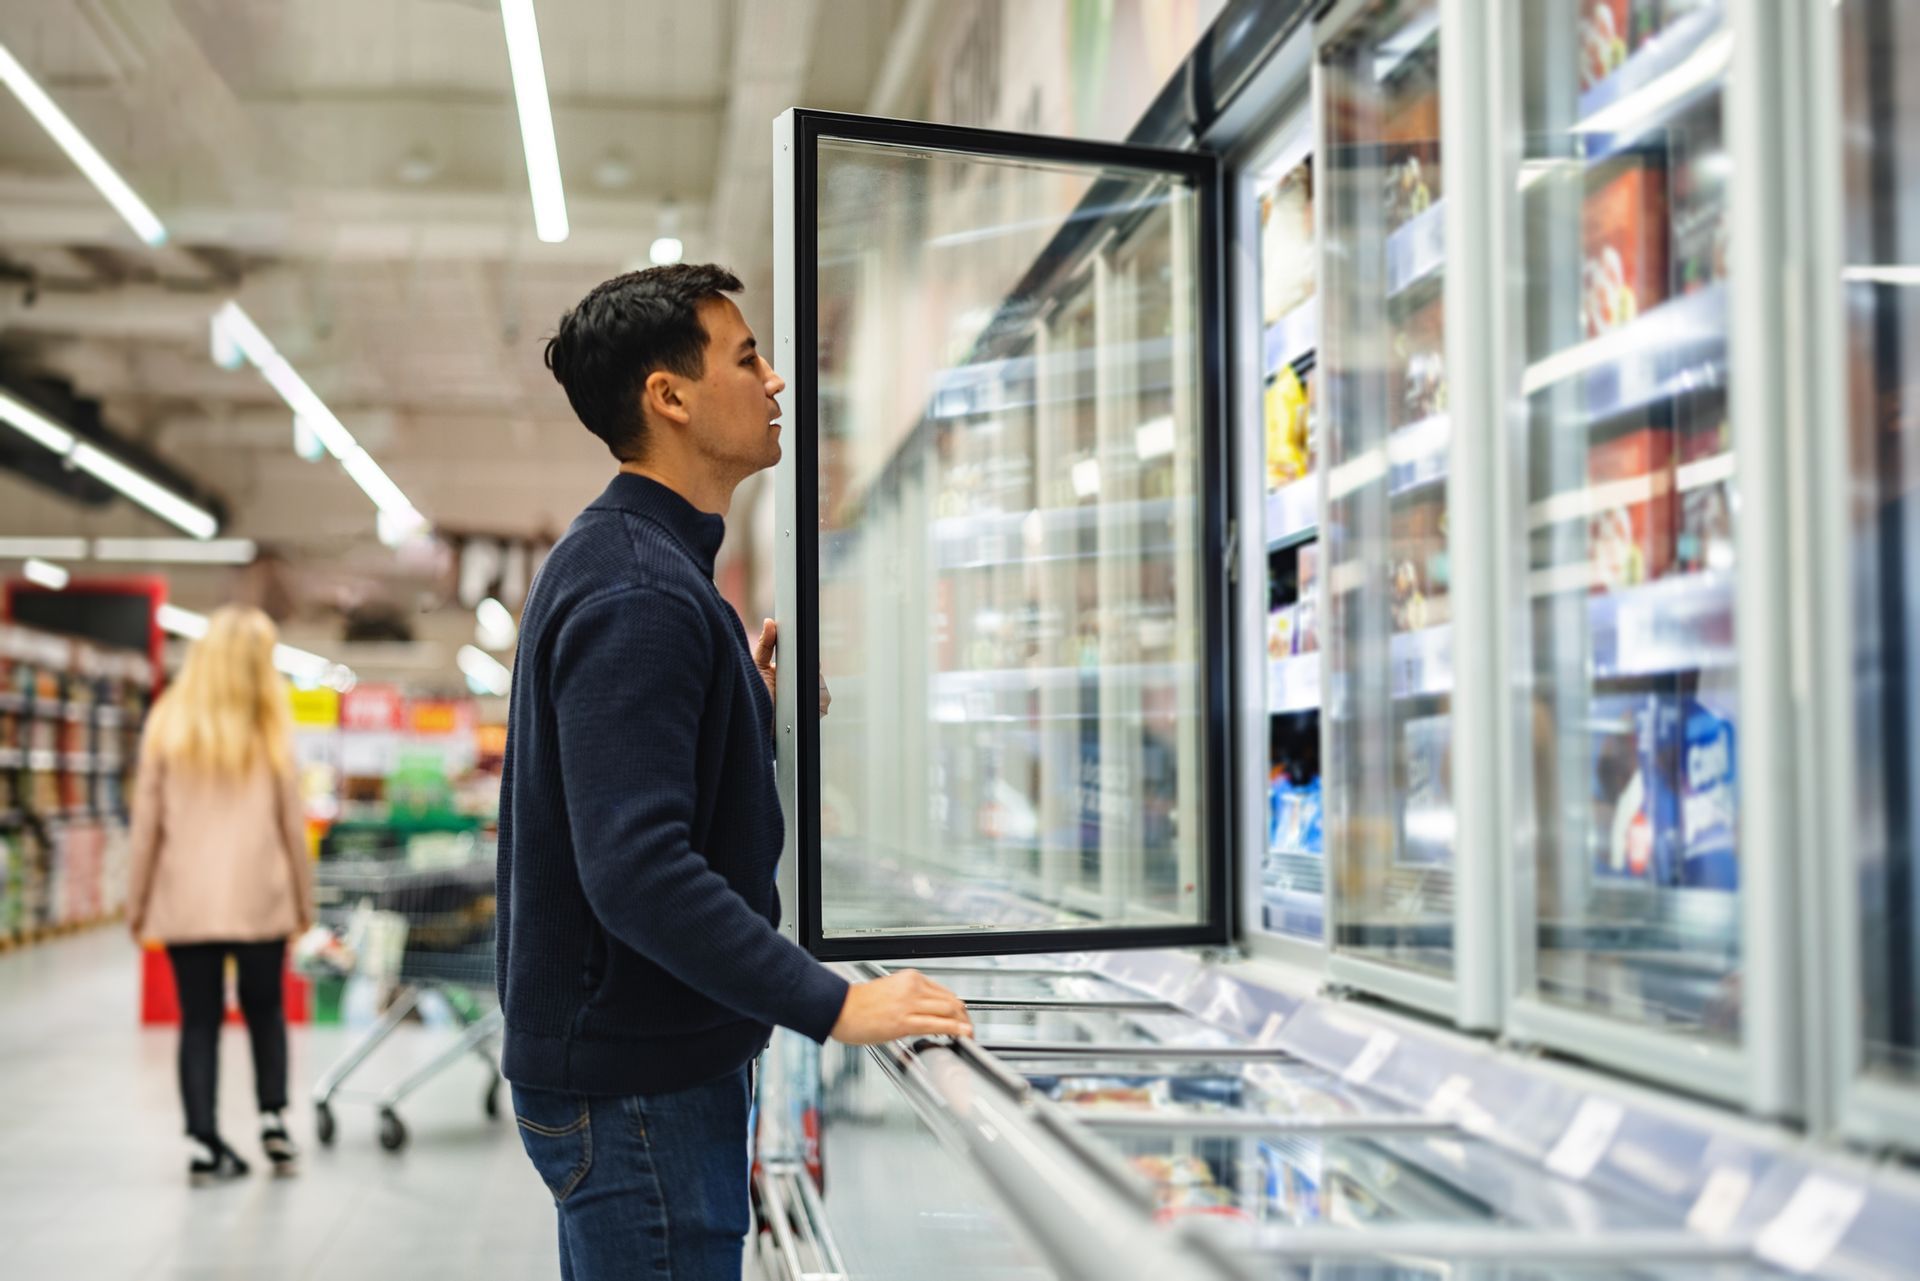 Man standing in front of commercial refrigerator in grocery store.